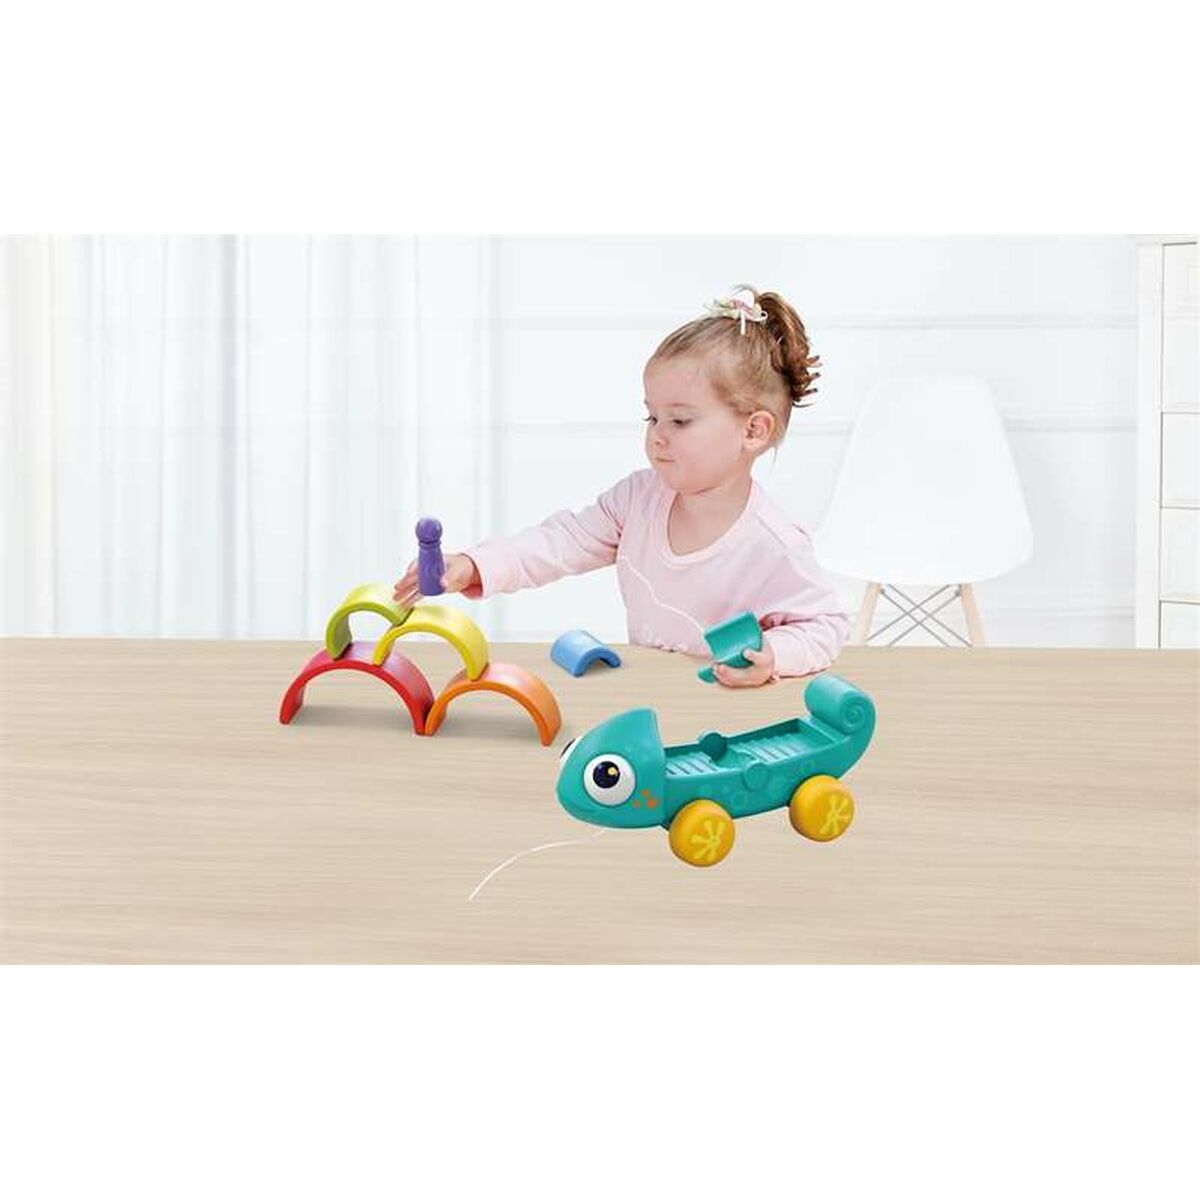 Skill Game for Babies 29 x 14 x 14 cm